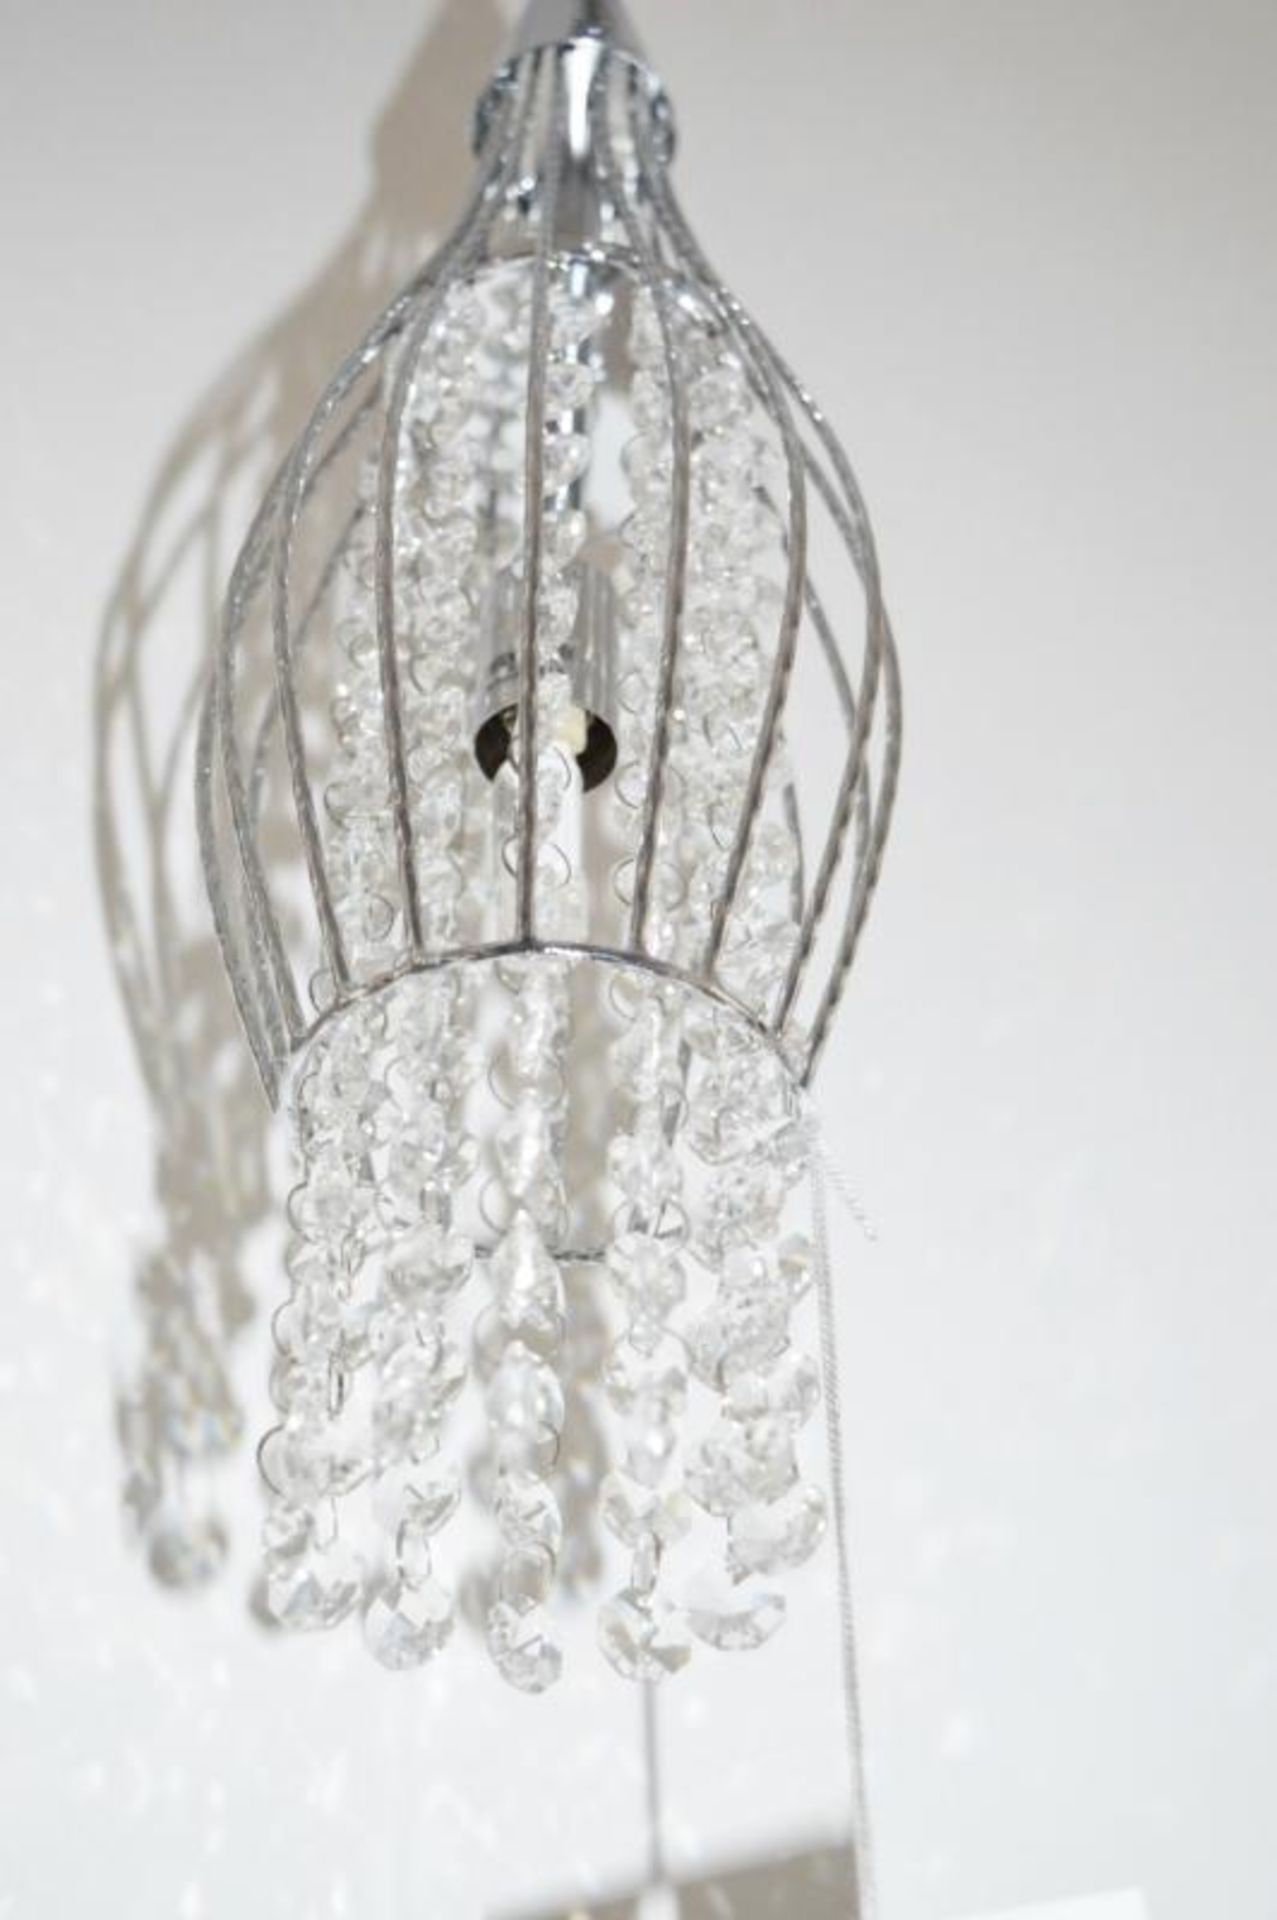 1 x Rocket Chrome 3-Light Cage Multi-drop Pendant Light With Clear Crystal Buttons - Ex Display Stoc - Image 3 of 3